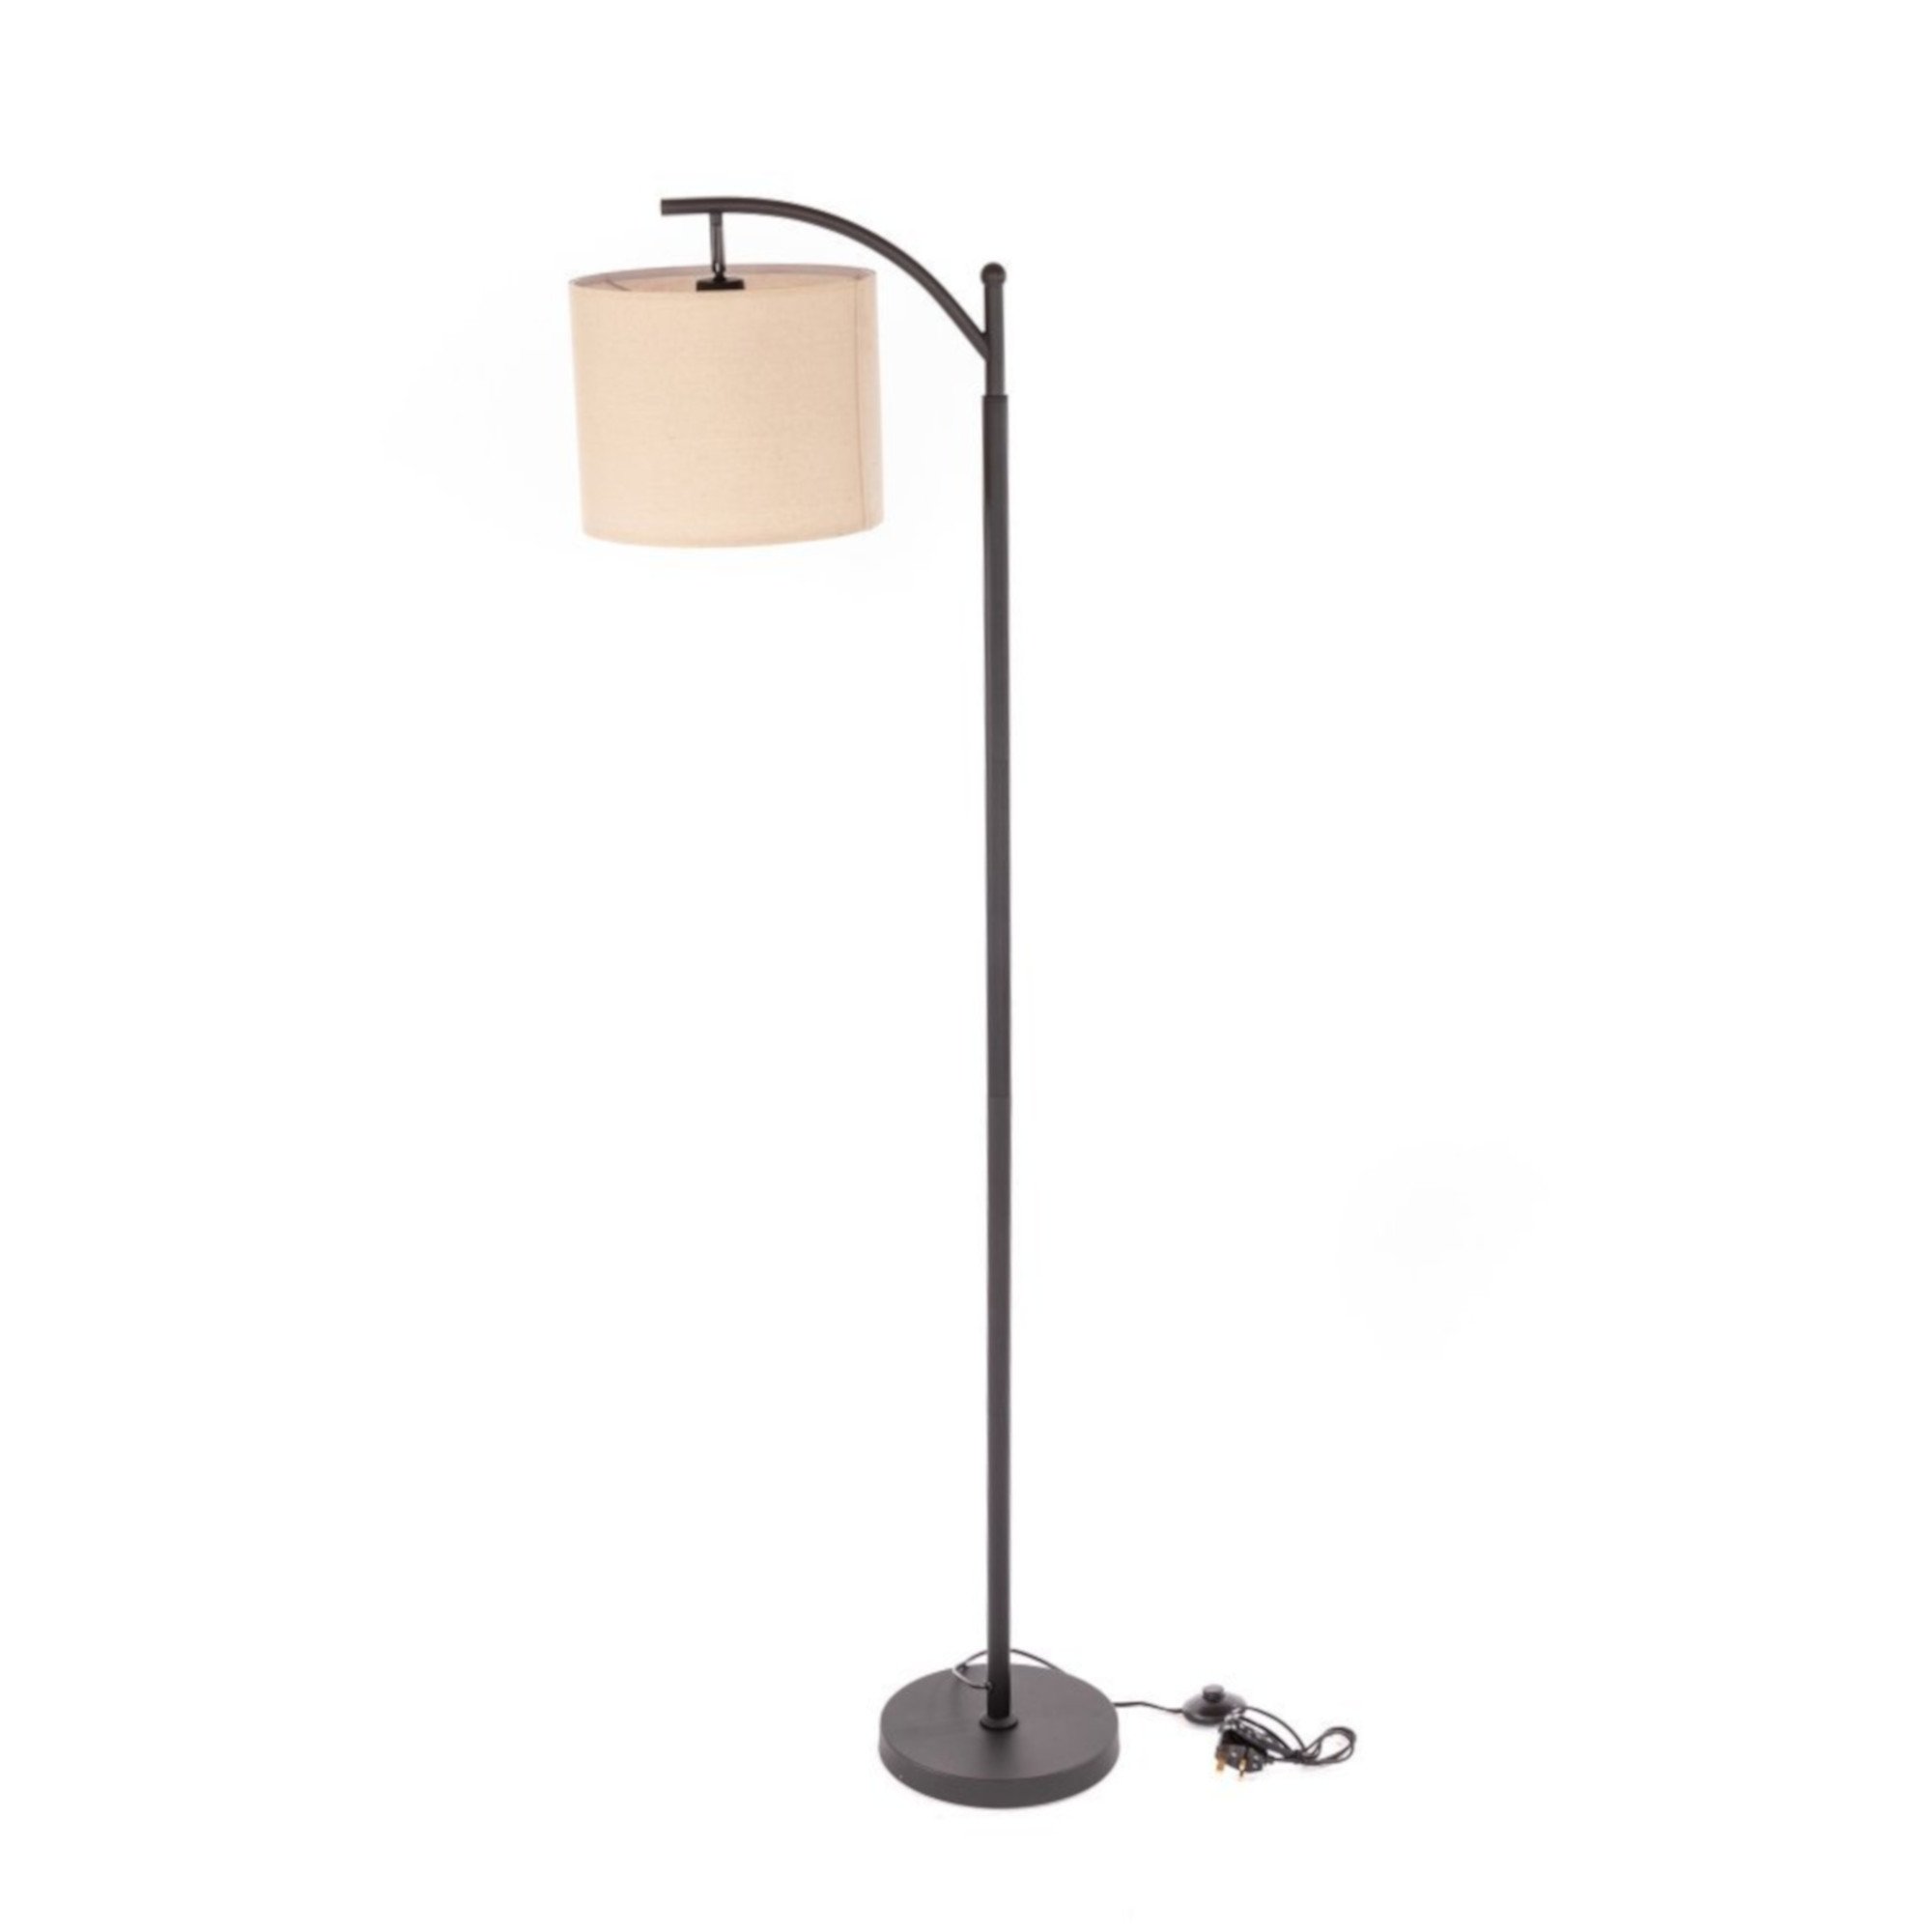 Black Floor Standing Lamp Reading Light & Linen Fabric Lampshade - Includes Bulb